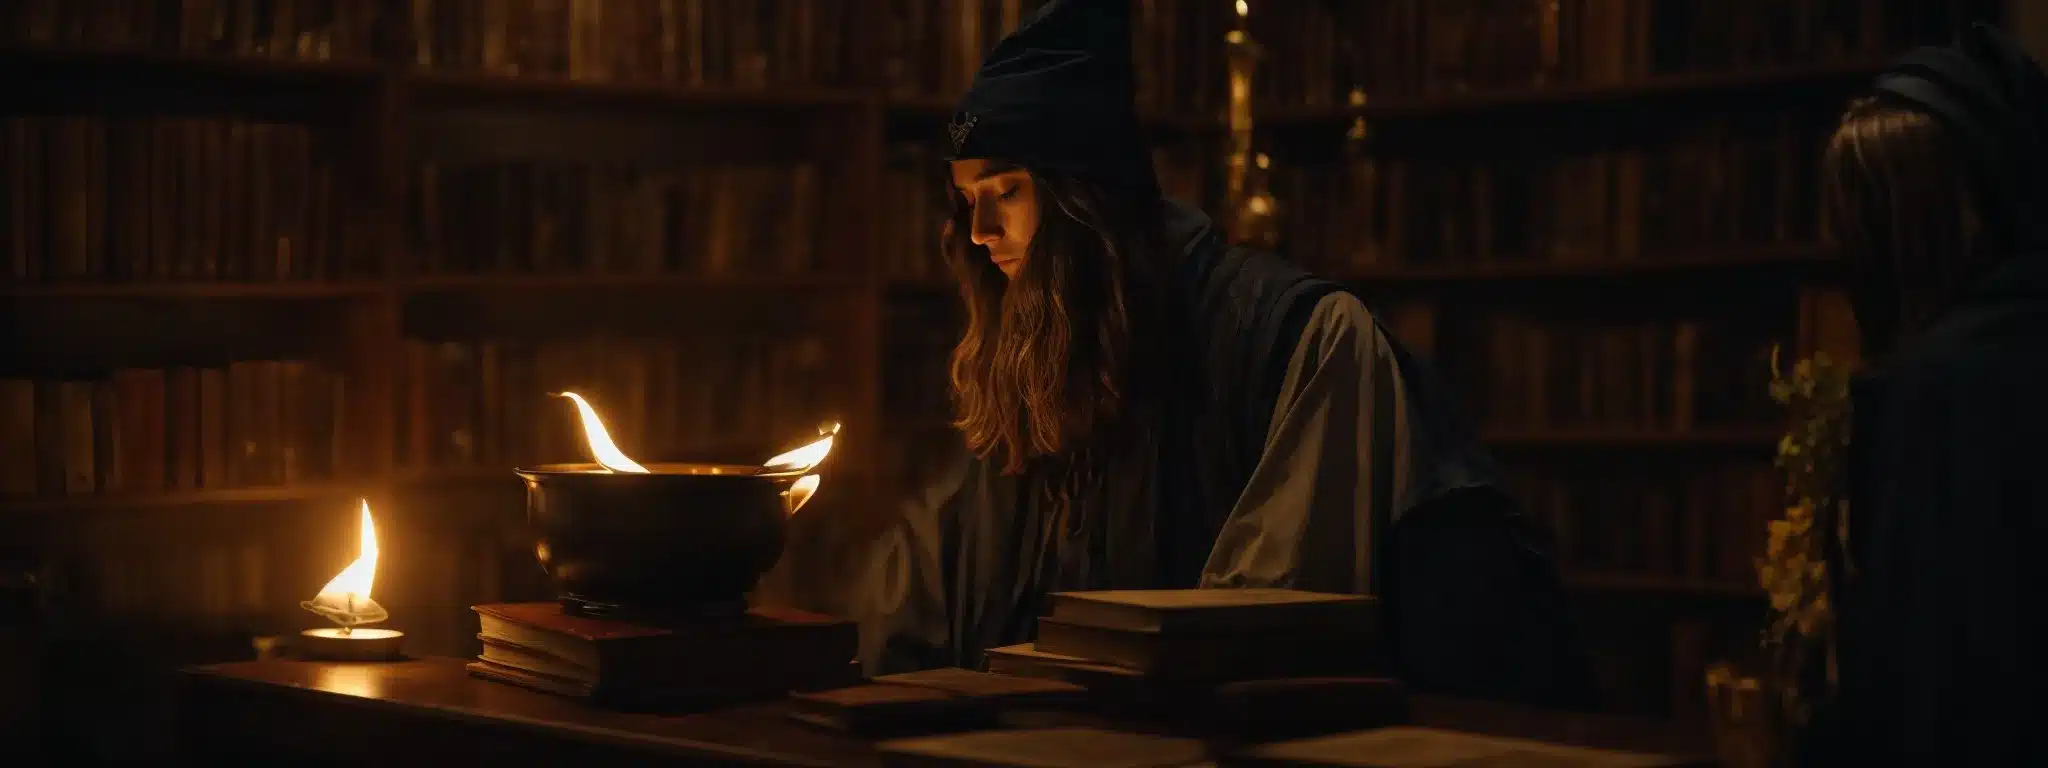 A Wizard-Like Figure Intently Combines Elements In A Glowing Cauldron, Surrounded By Ancient Books And Flickering Candlelight.